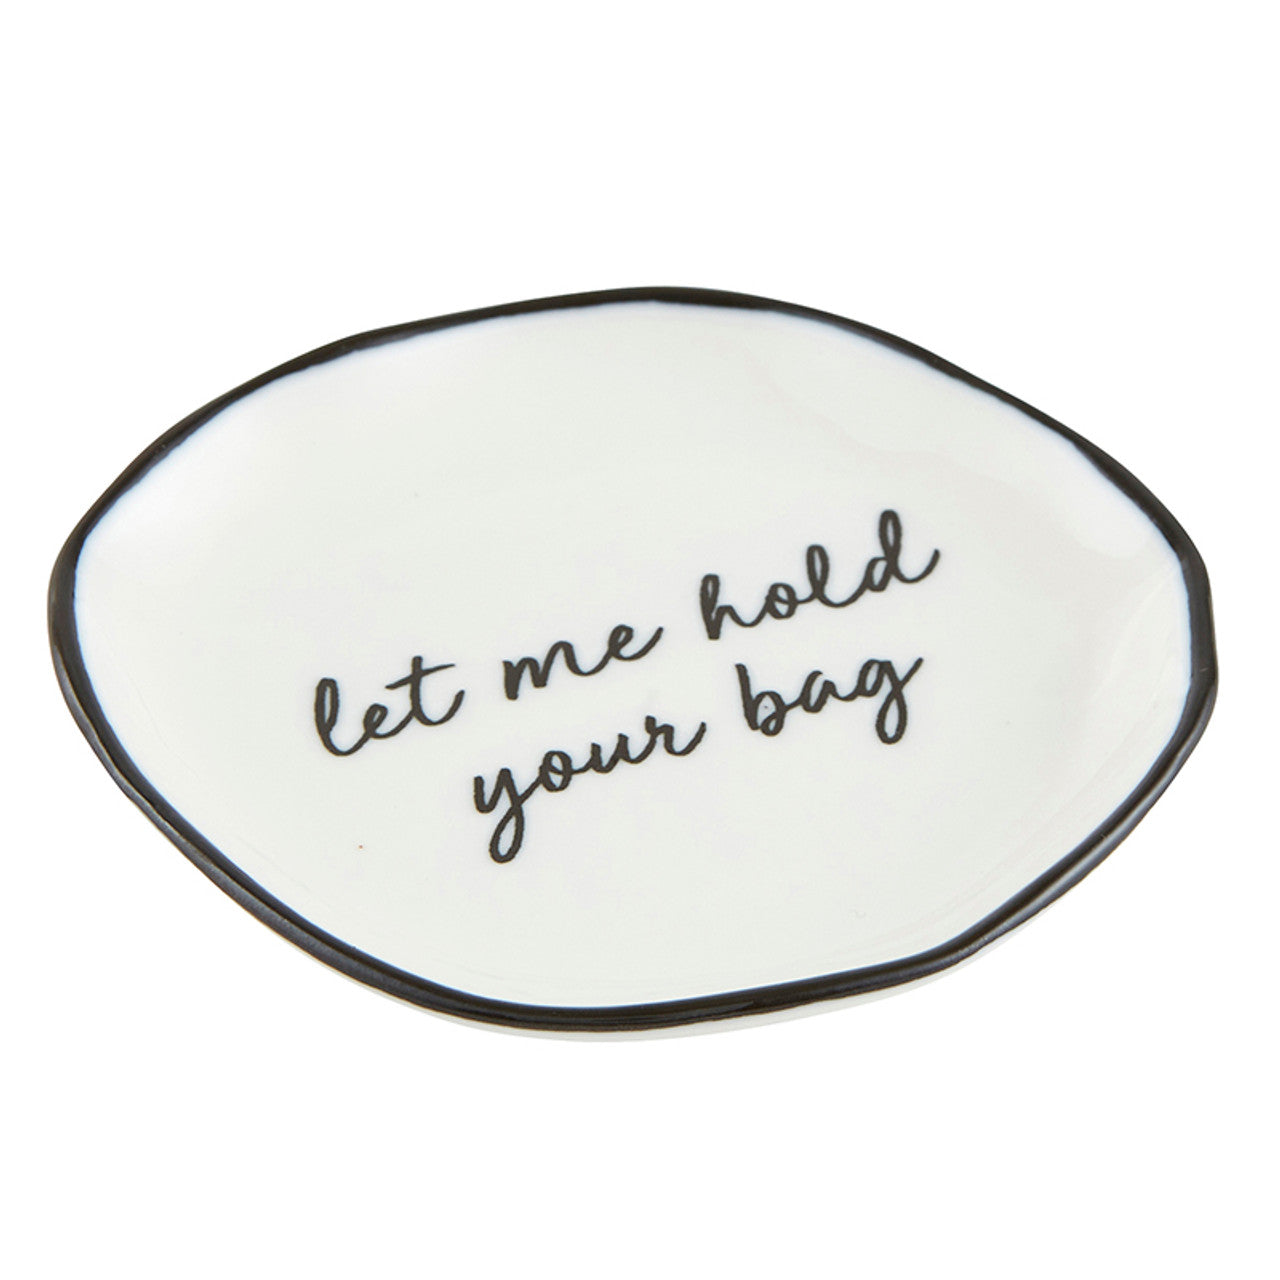 Let Me Hold Your Bag Tea Tray | 3.5" Tray to Hold Tea Bag | Stylishly Re-Use Your Teabags